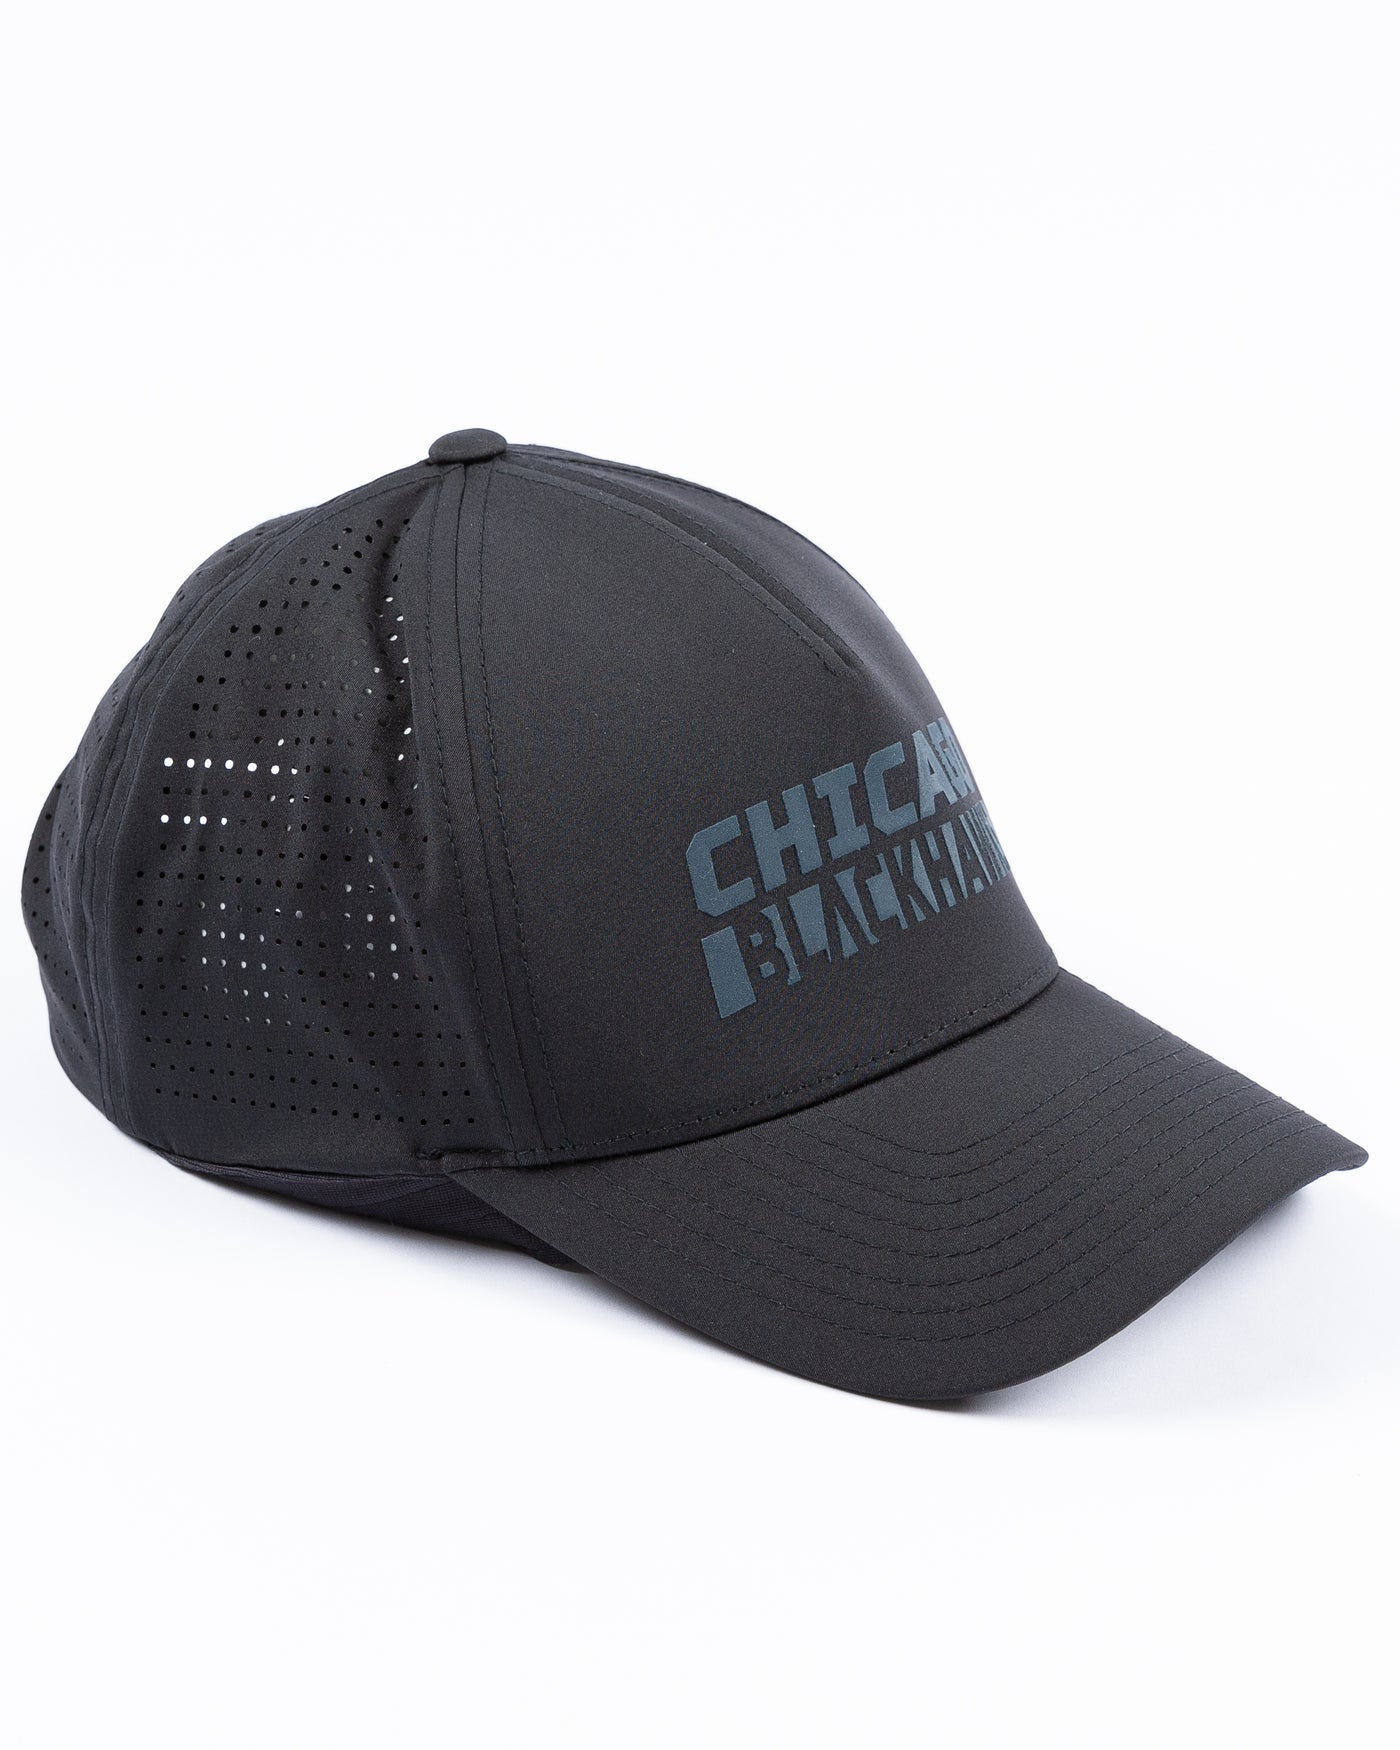 black CCM adjustable lightweight breathable cap with Chicago Blackhawks wordmark on front and tonal primary logo on left side - right angle lay flat